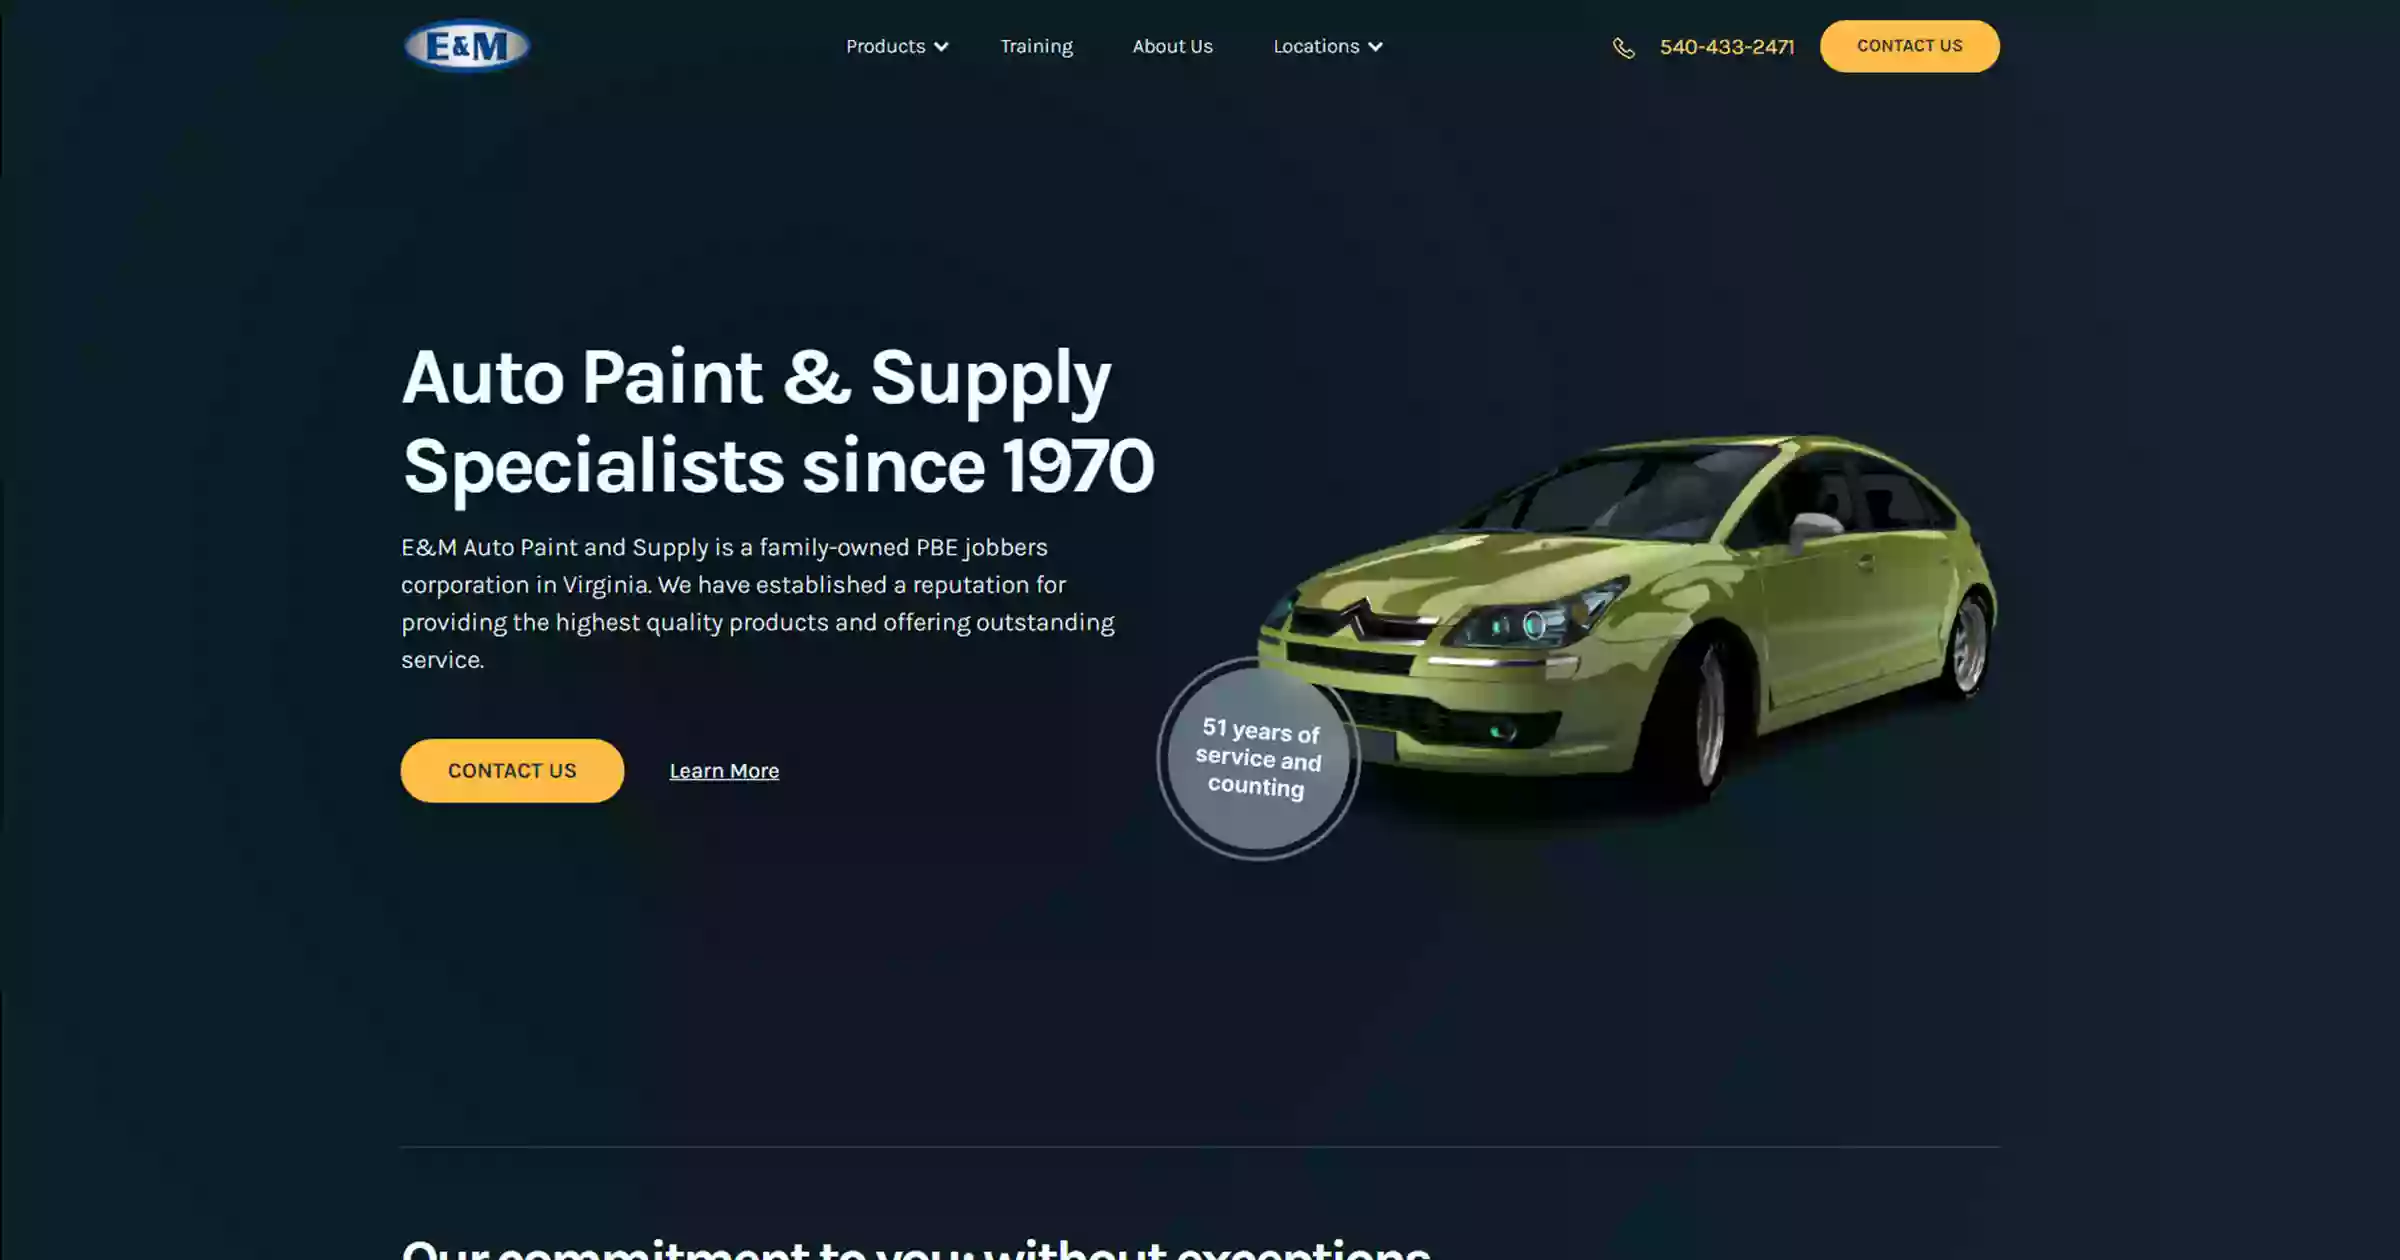 E & M Auto Paint And Supply Corporation